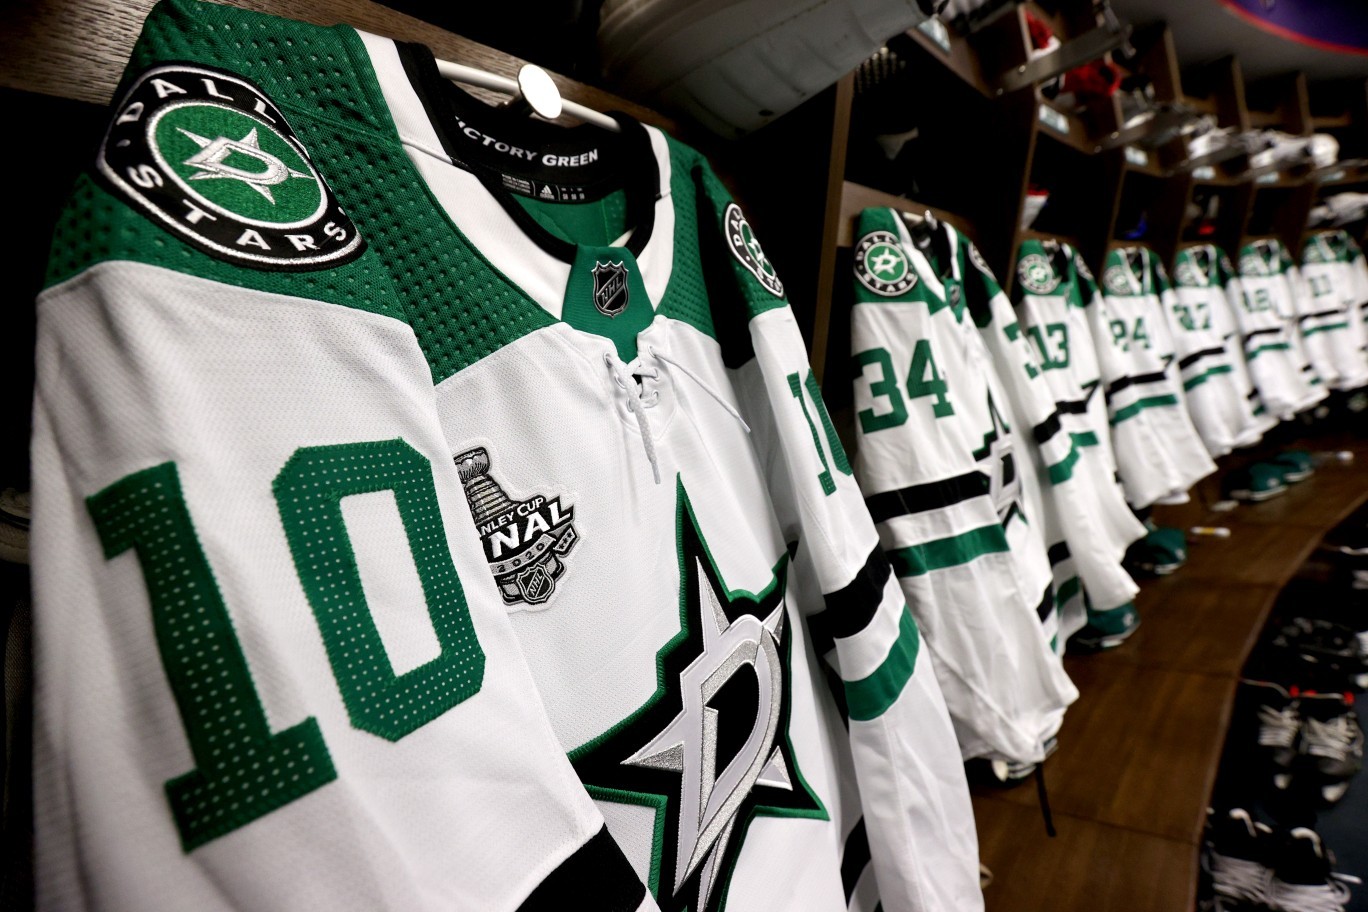 NHL Reverse Retro Jerseys Are Back: Details On Every Team's